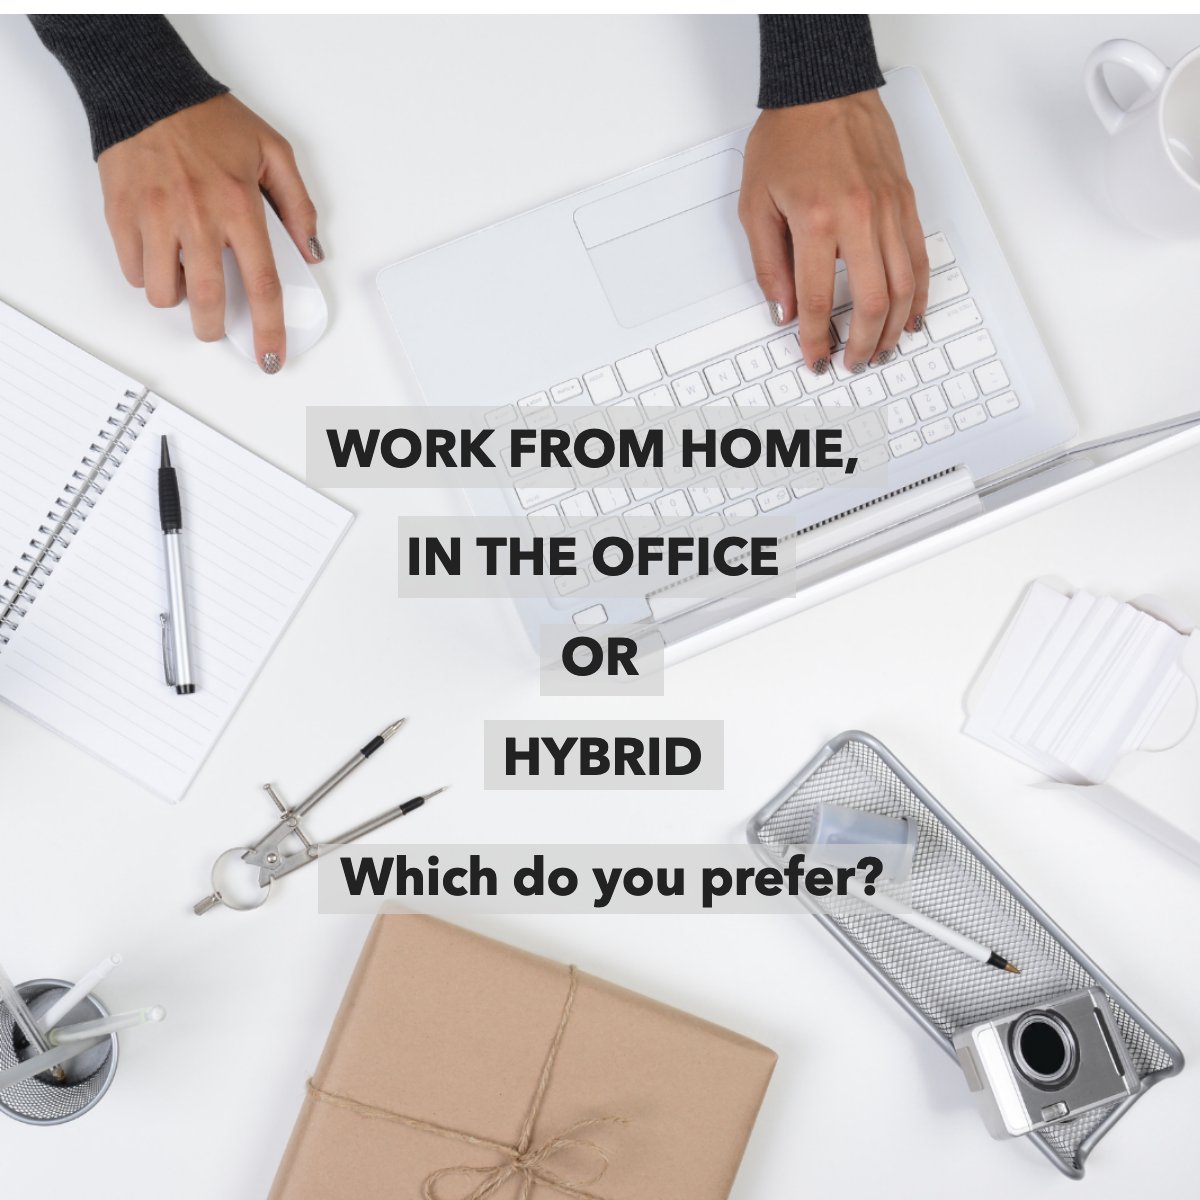 Do you have a dedicated working space 🧑‍💻 
Tell us in the comments 💭!
 #RanchoCucamongaRealEstate #JoeLimoBroker #RealEstateBroker #Realtor #RealEstateAgent #InlandEmpireHomes #InlandEmpireRealtor #Rialto #Ontario #Upland #Claremont #Redlands #Fontana #Whittier